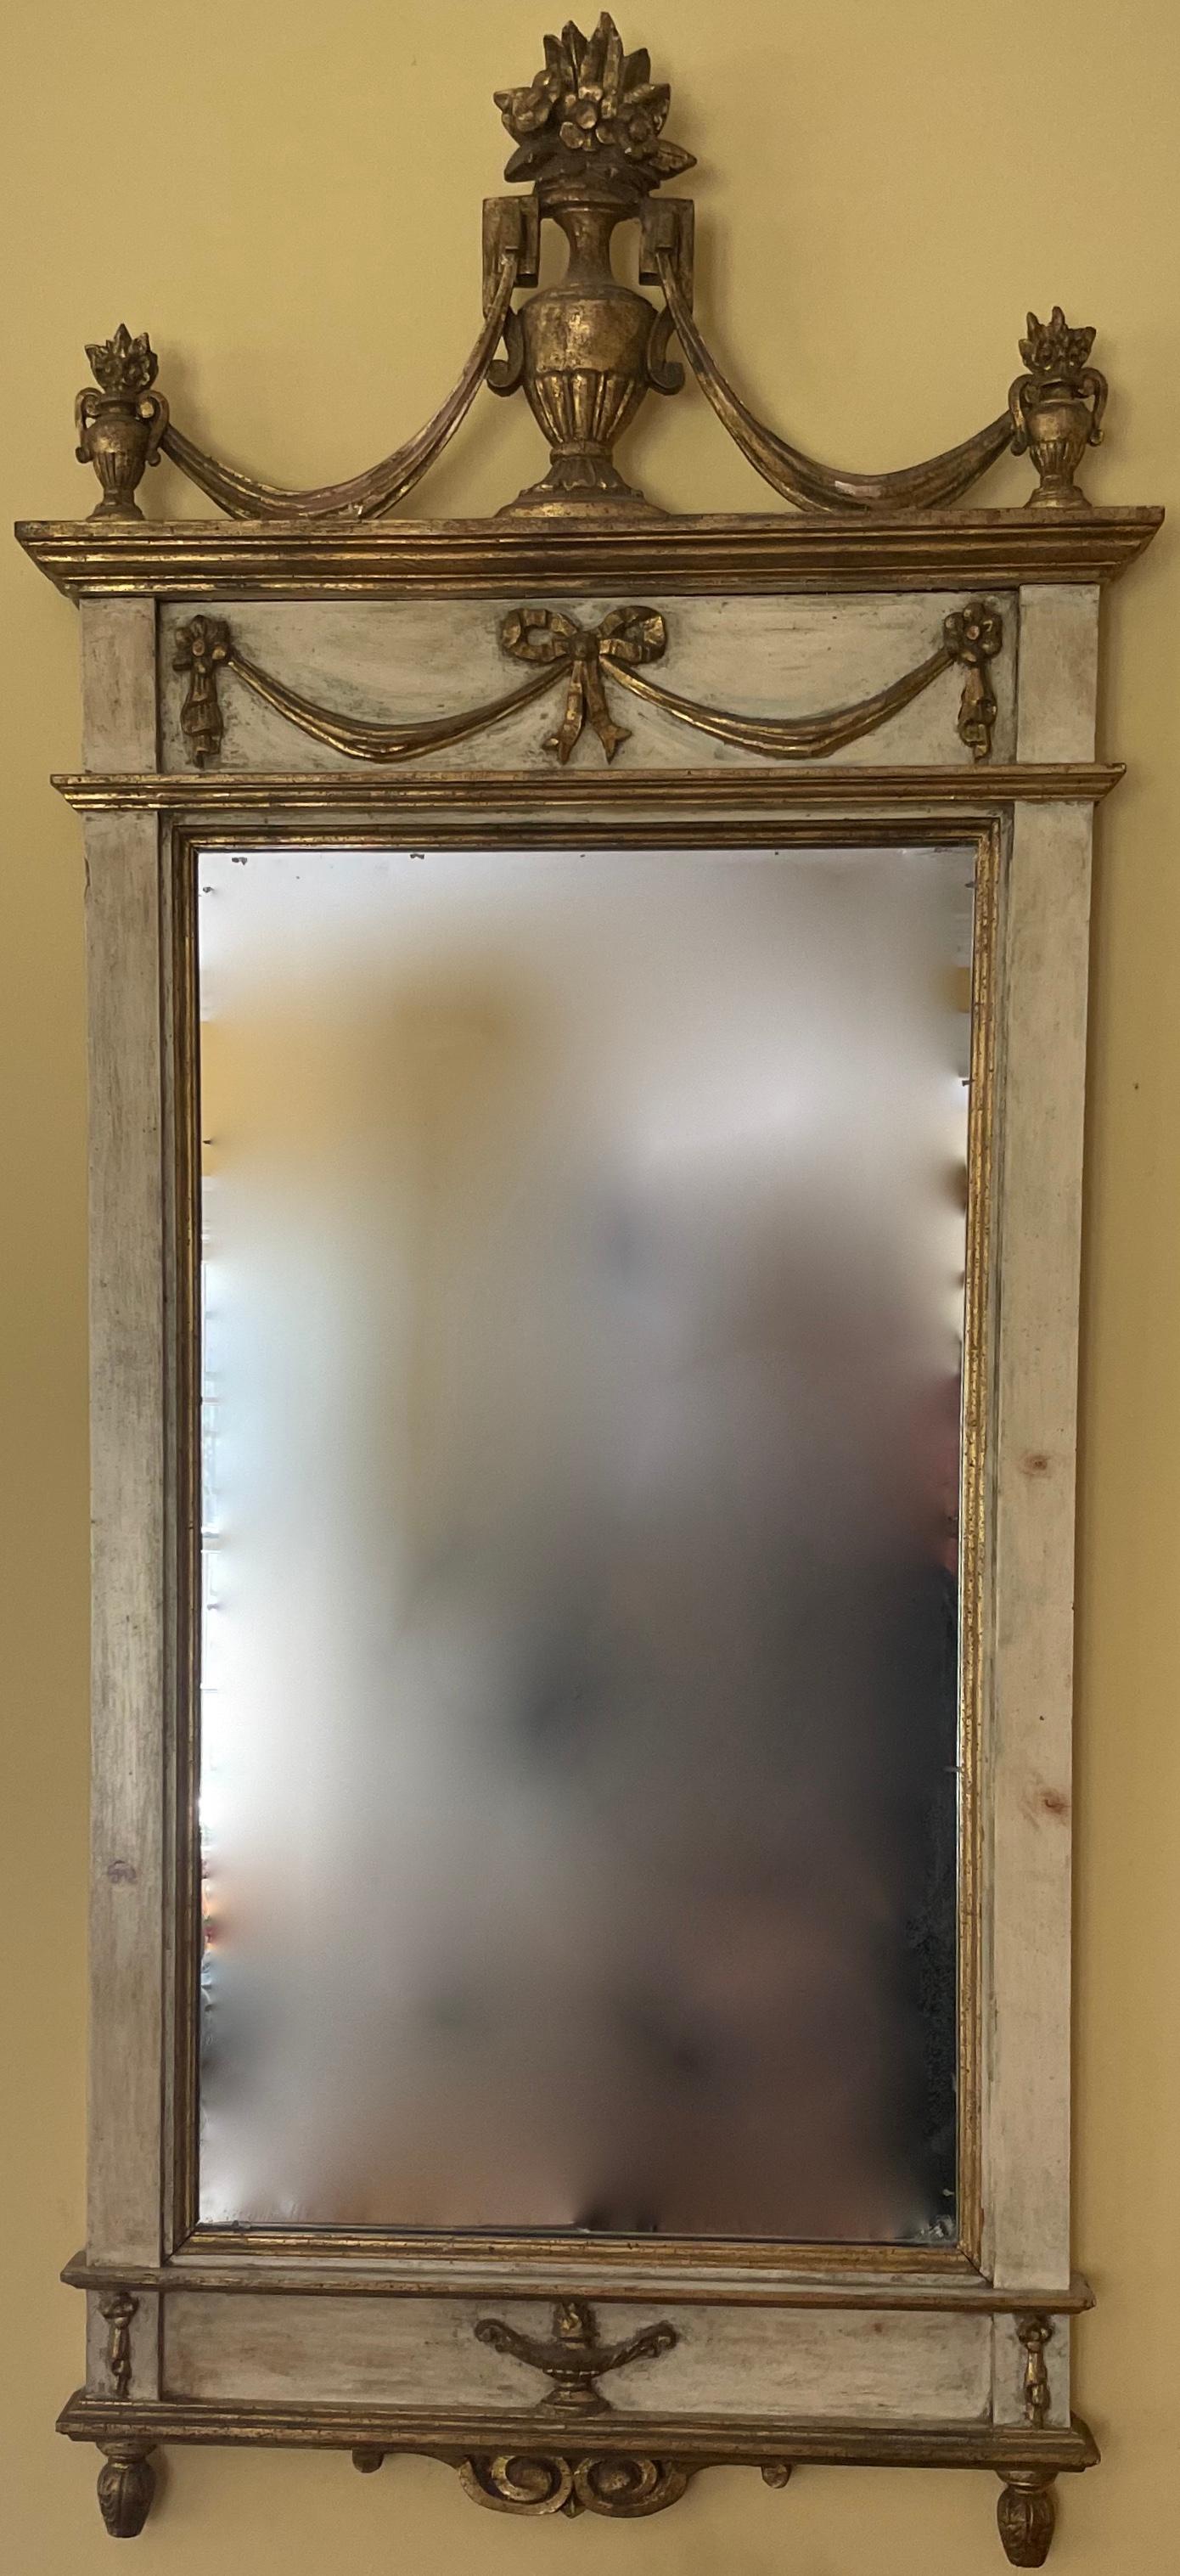 Vintage Italian painted and gilt carved mirror. Butter yellow painted and gilt carved mirror in the neoclassical style with swags, finials and central urn finial issuing flowers. Mirror plate is original with evidence of age. Italy,